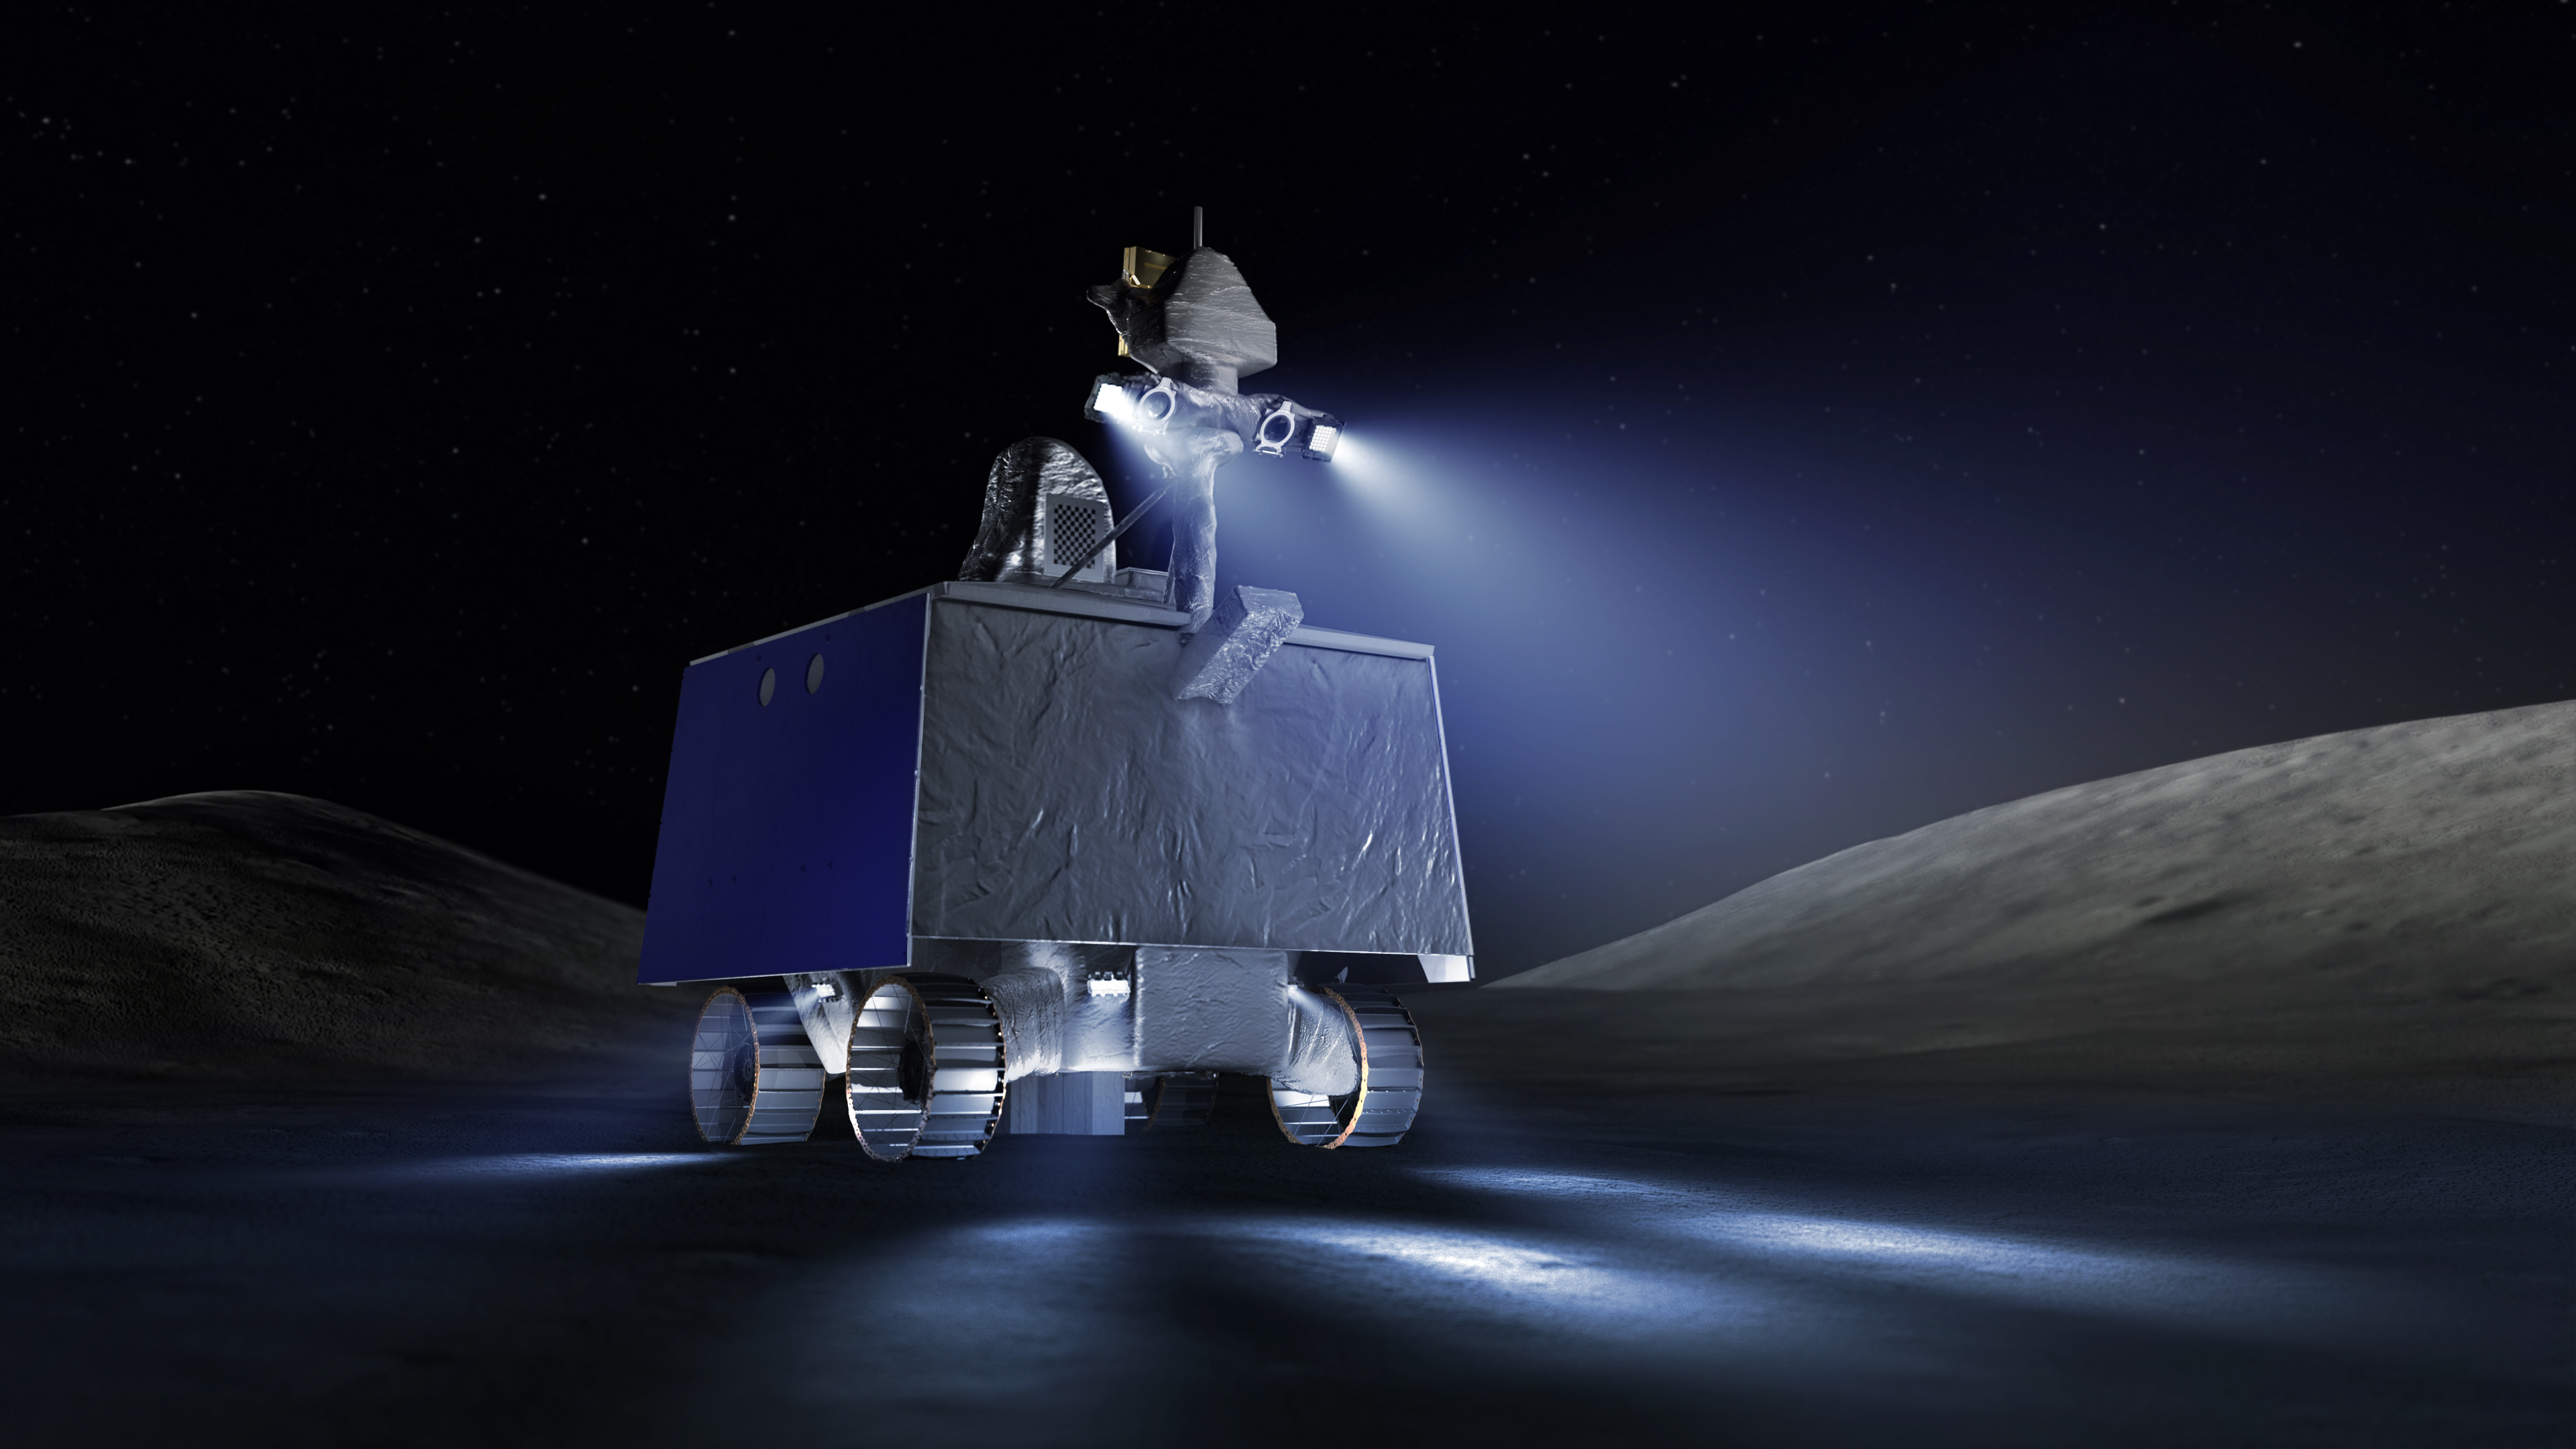 NASA Extends Invitation to Public: Send Your Name to the Moon with Artemis Robotic Rover!